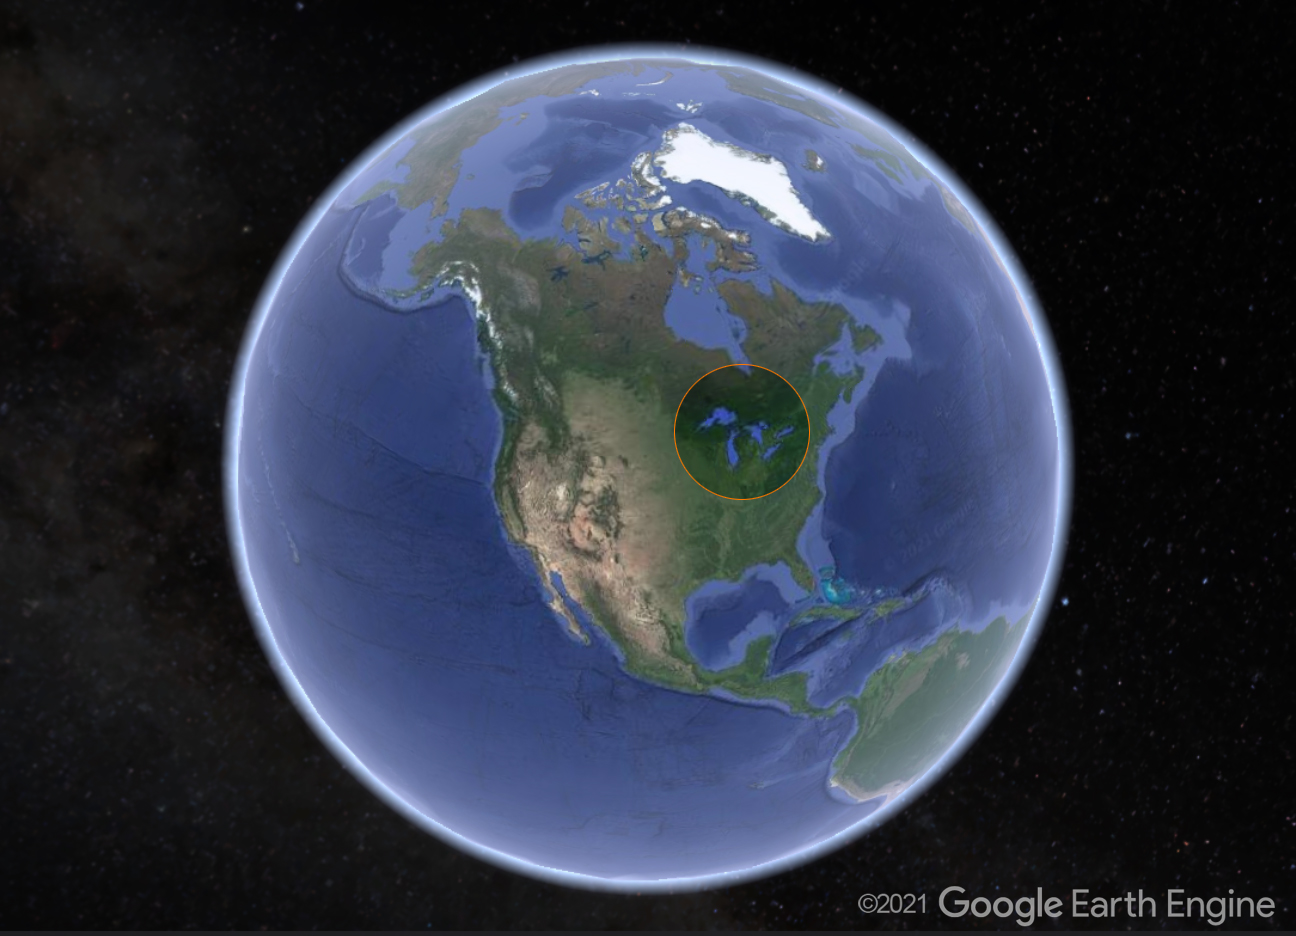 The Great Lakes as shown on Google Earth app.